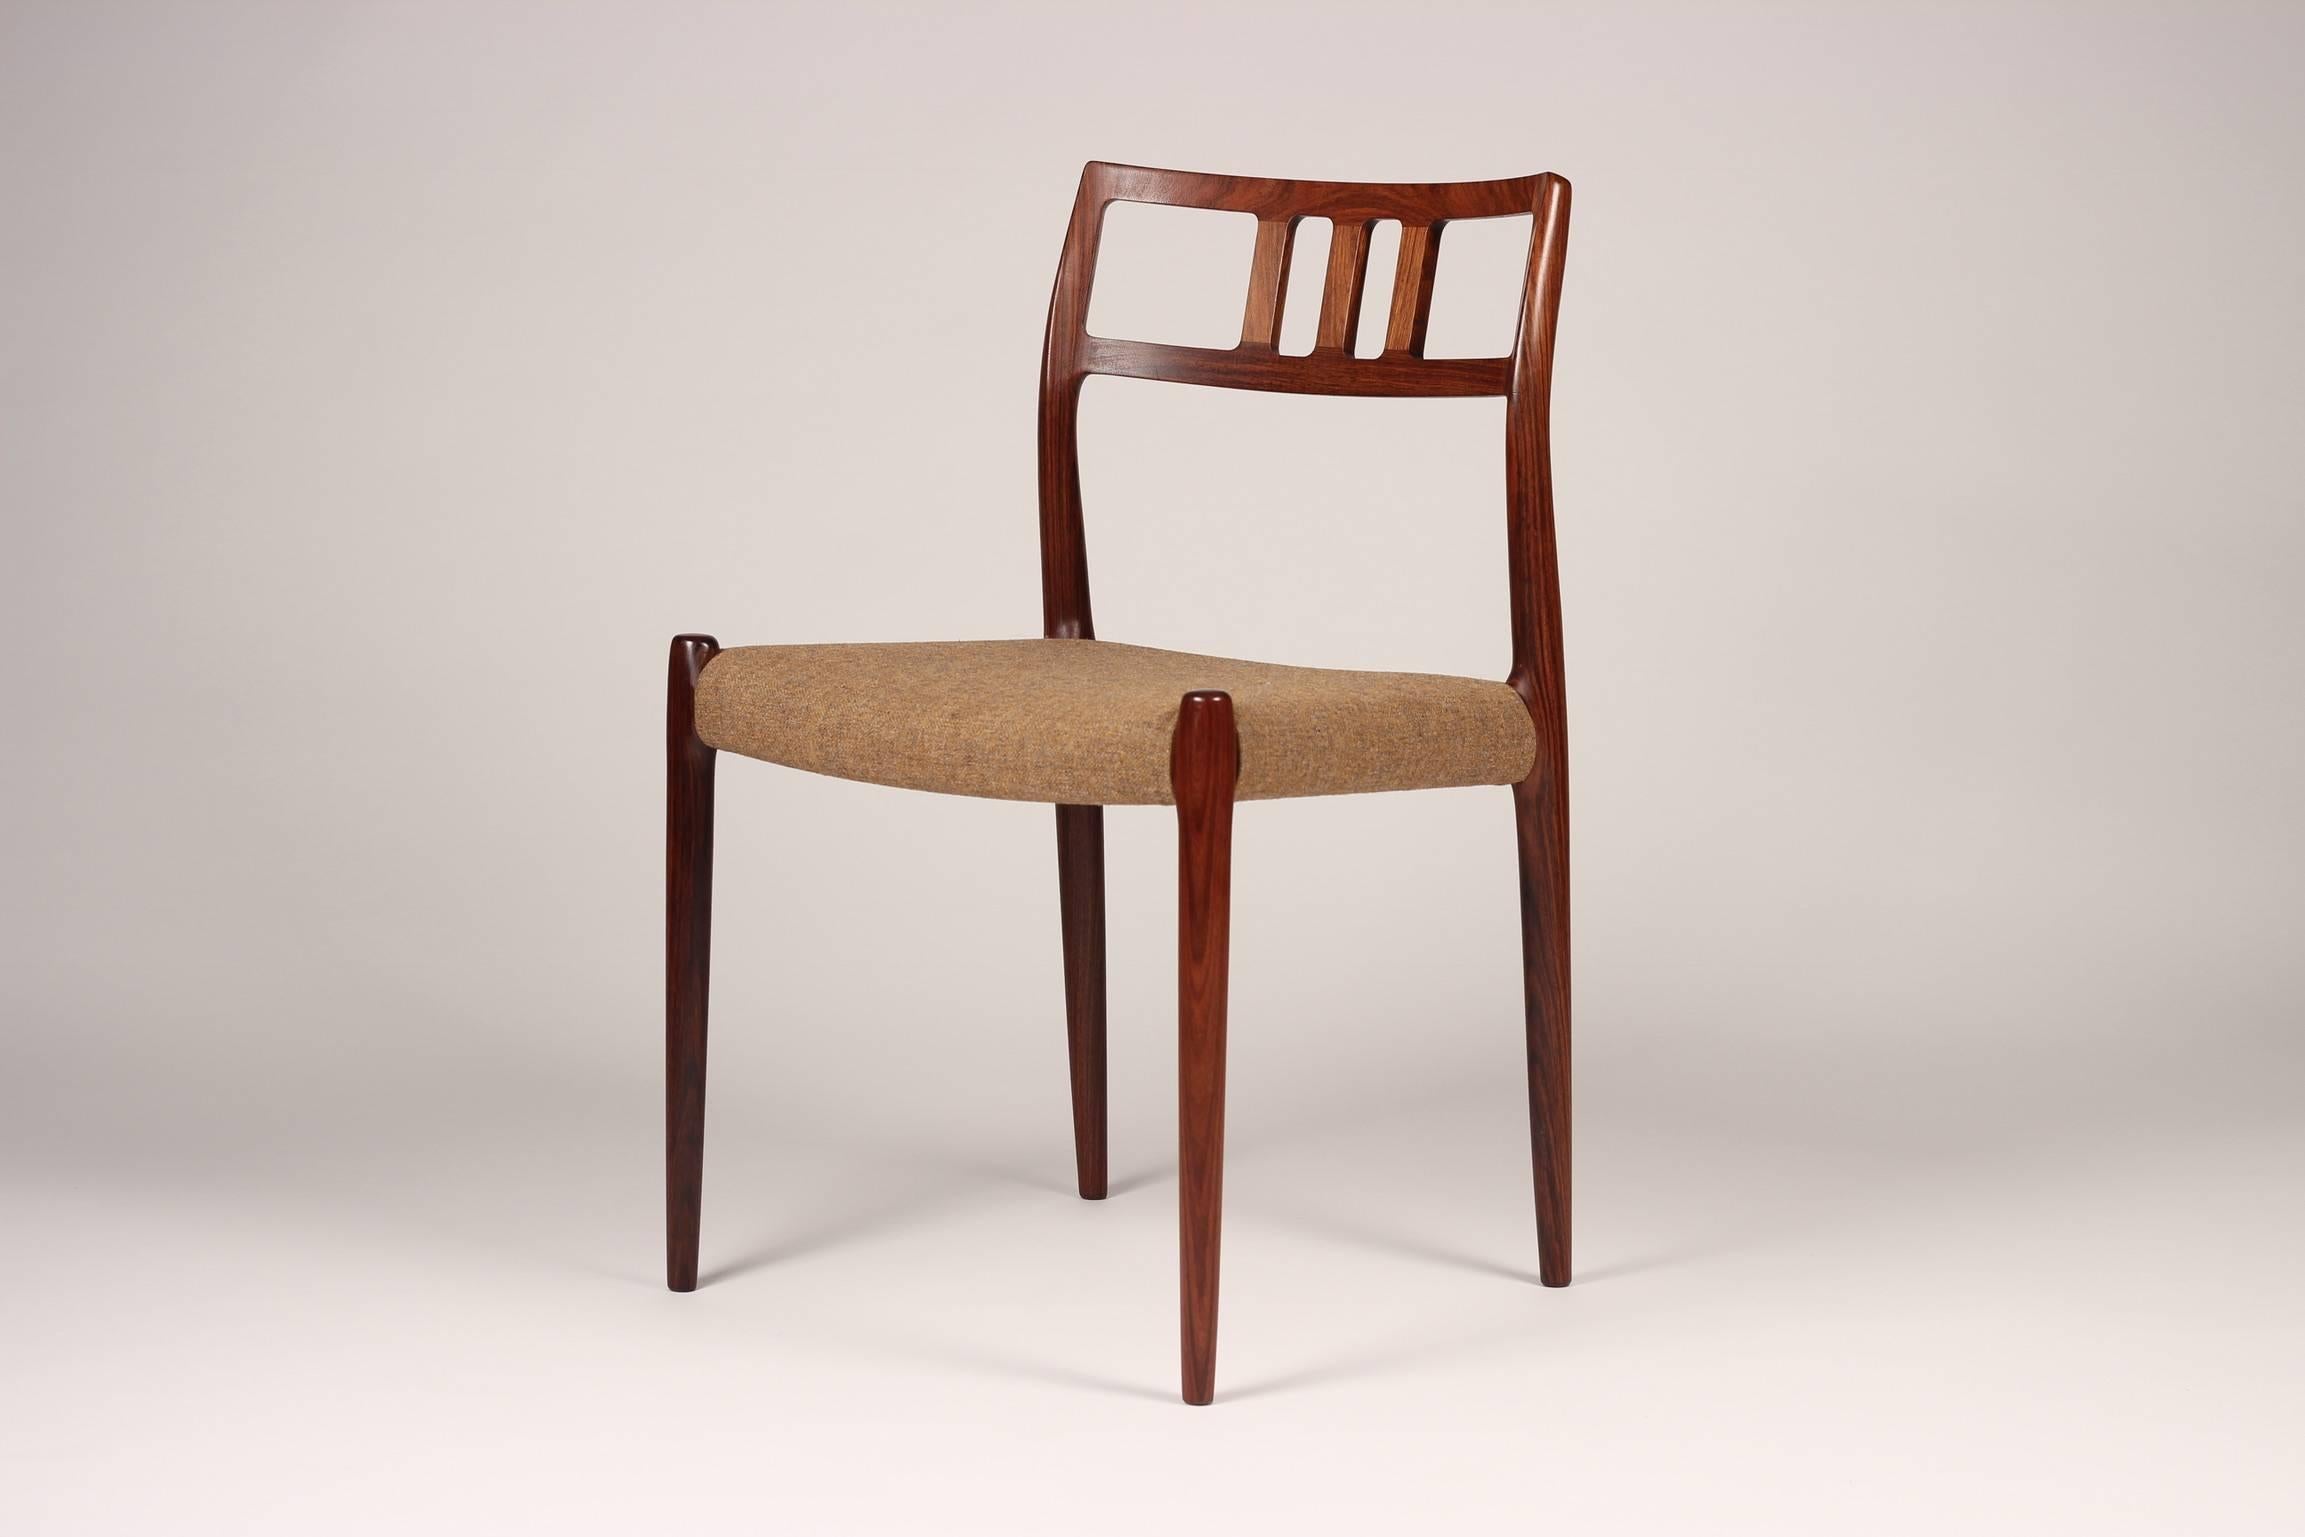 A beautiful, timeless and rare set of rosewood dining chairs designed by Niels O. Møller and made by J.L Møller Møbelfabrik. The chairs were discovered as a complete set and are in wonderful original condition, with the potential to recover in ones